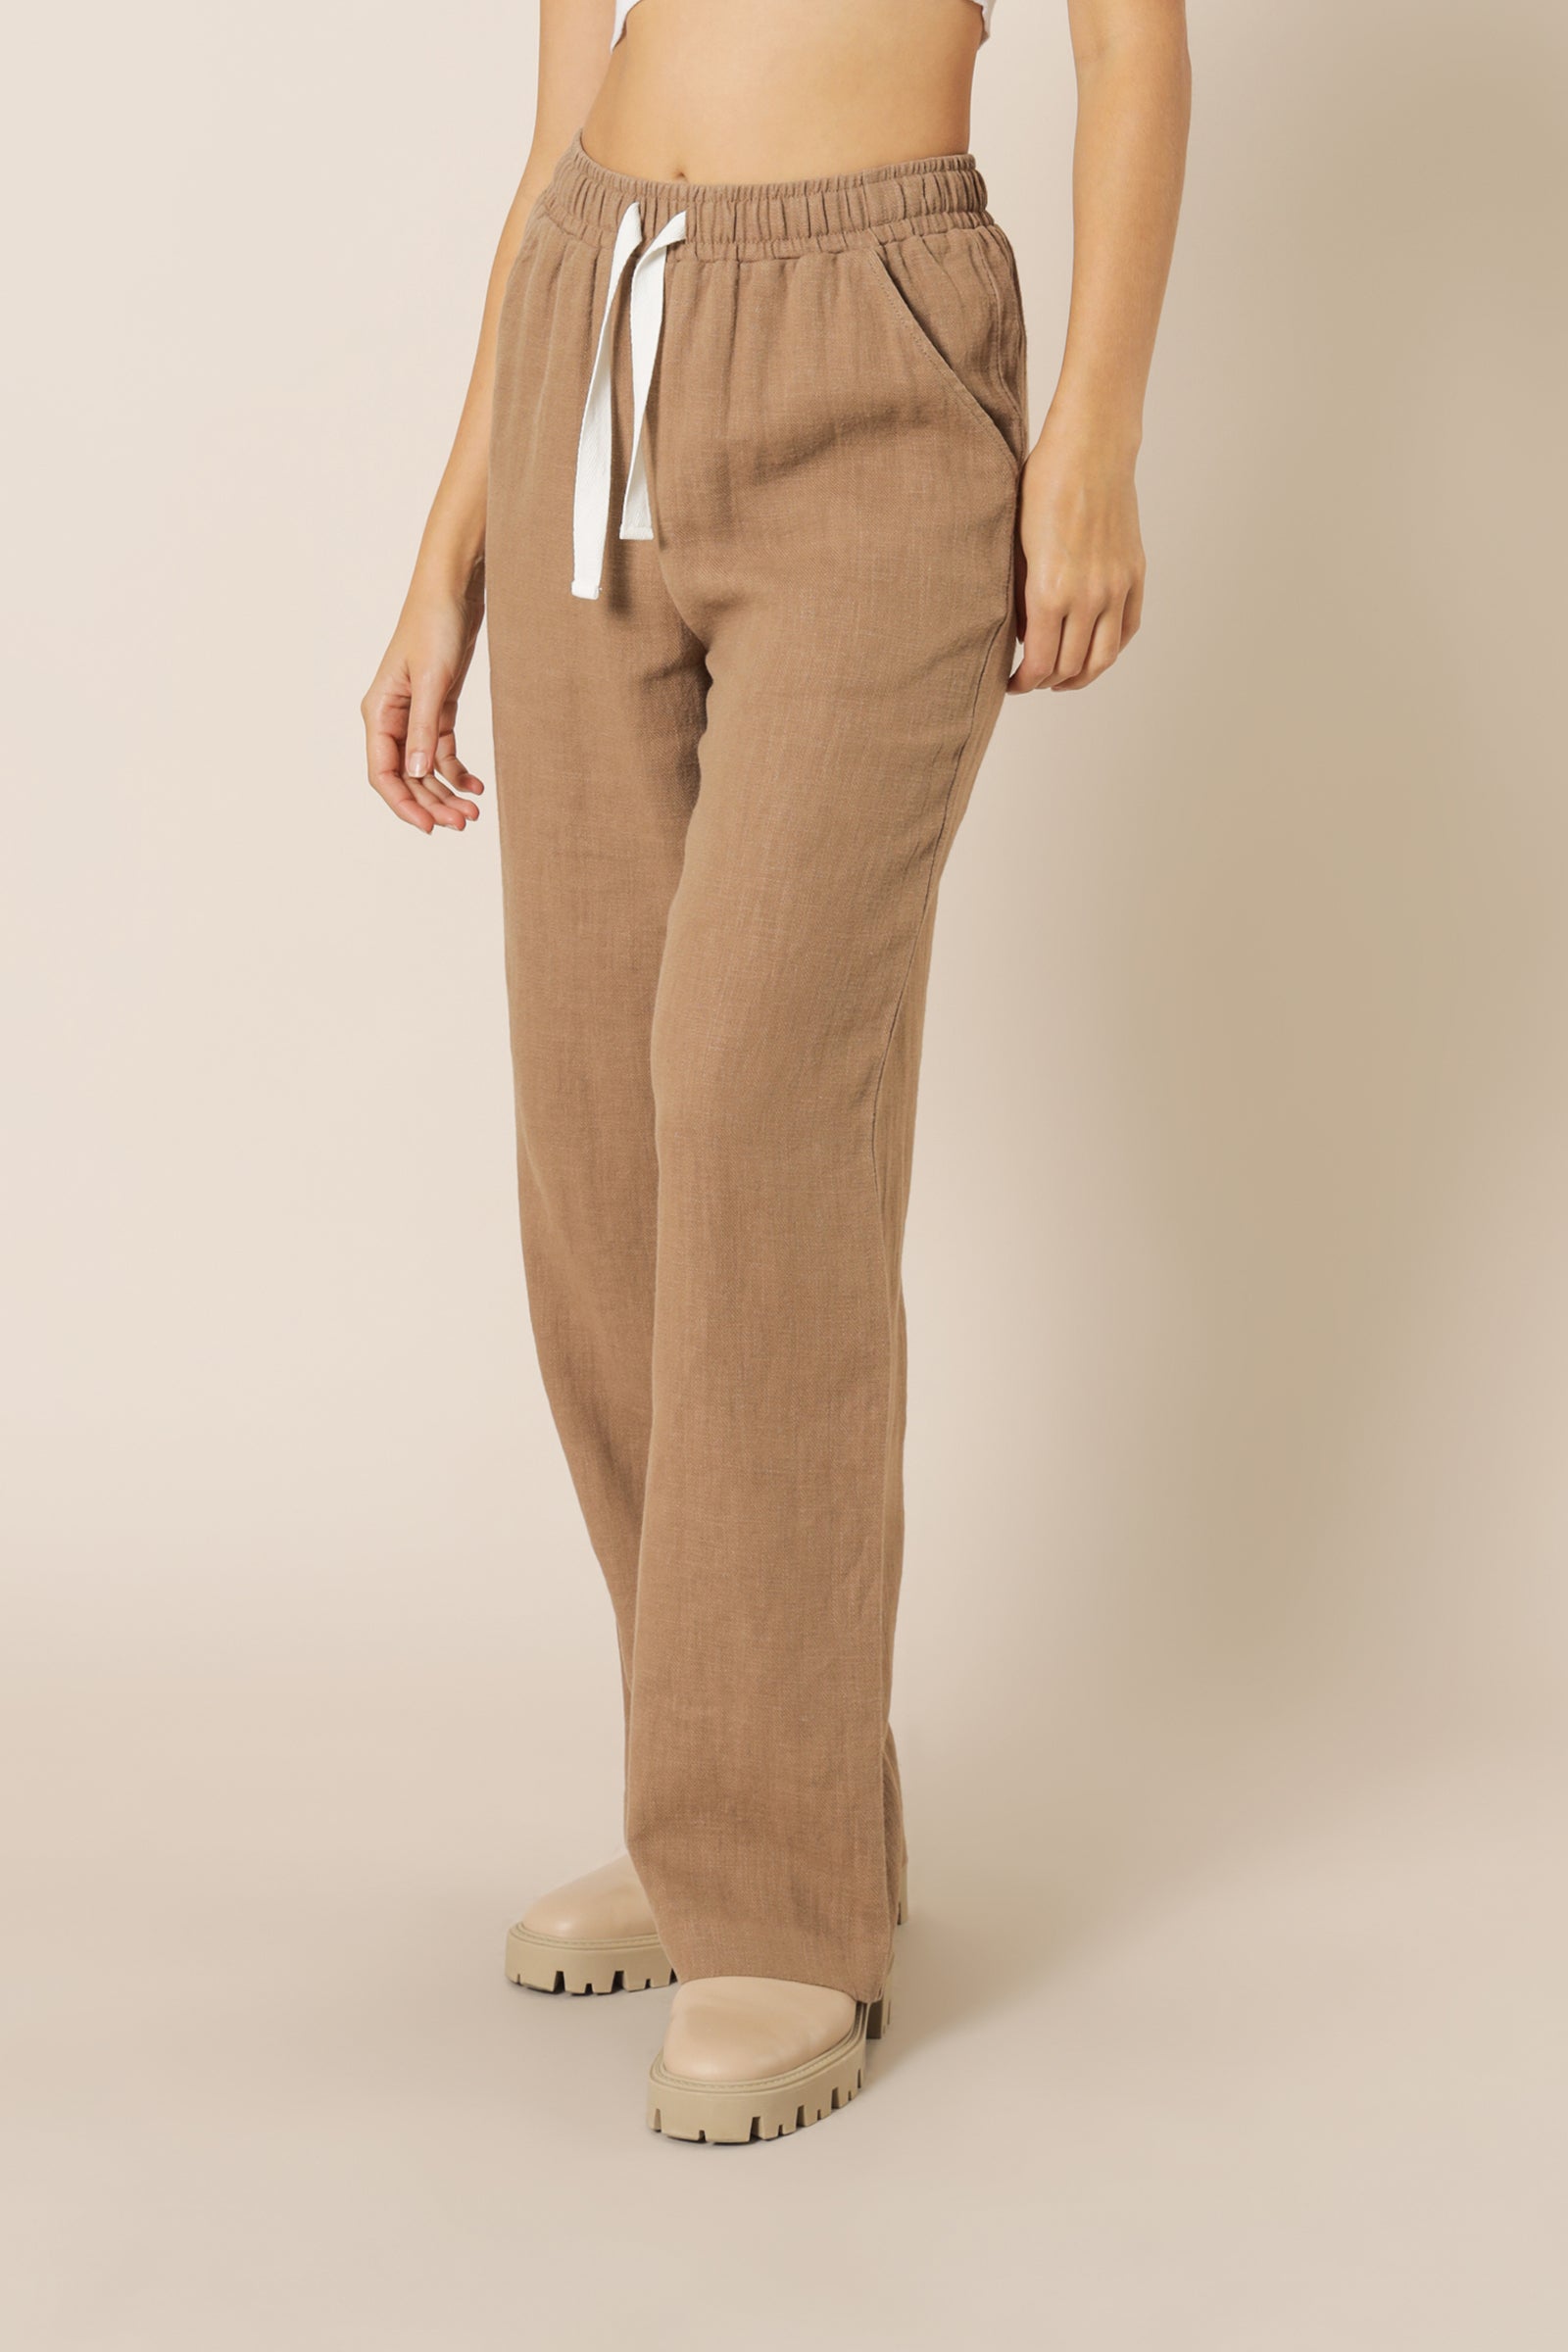 Nude Lucy marvin wide leg pant coffee pants